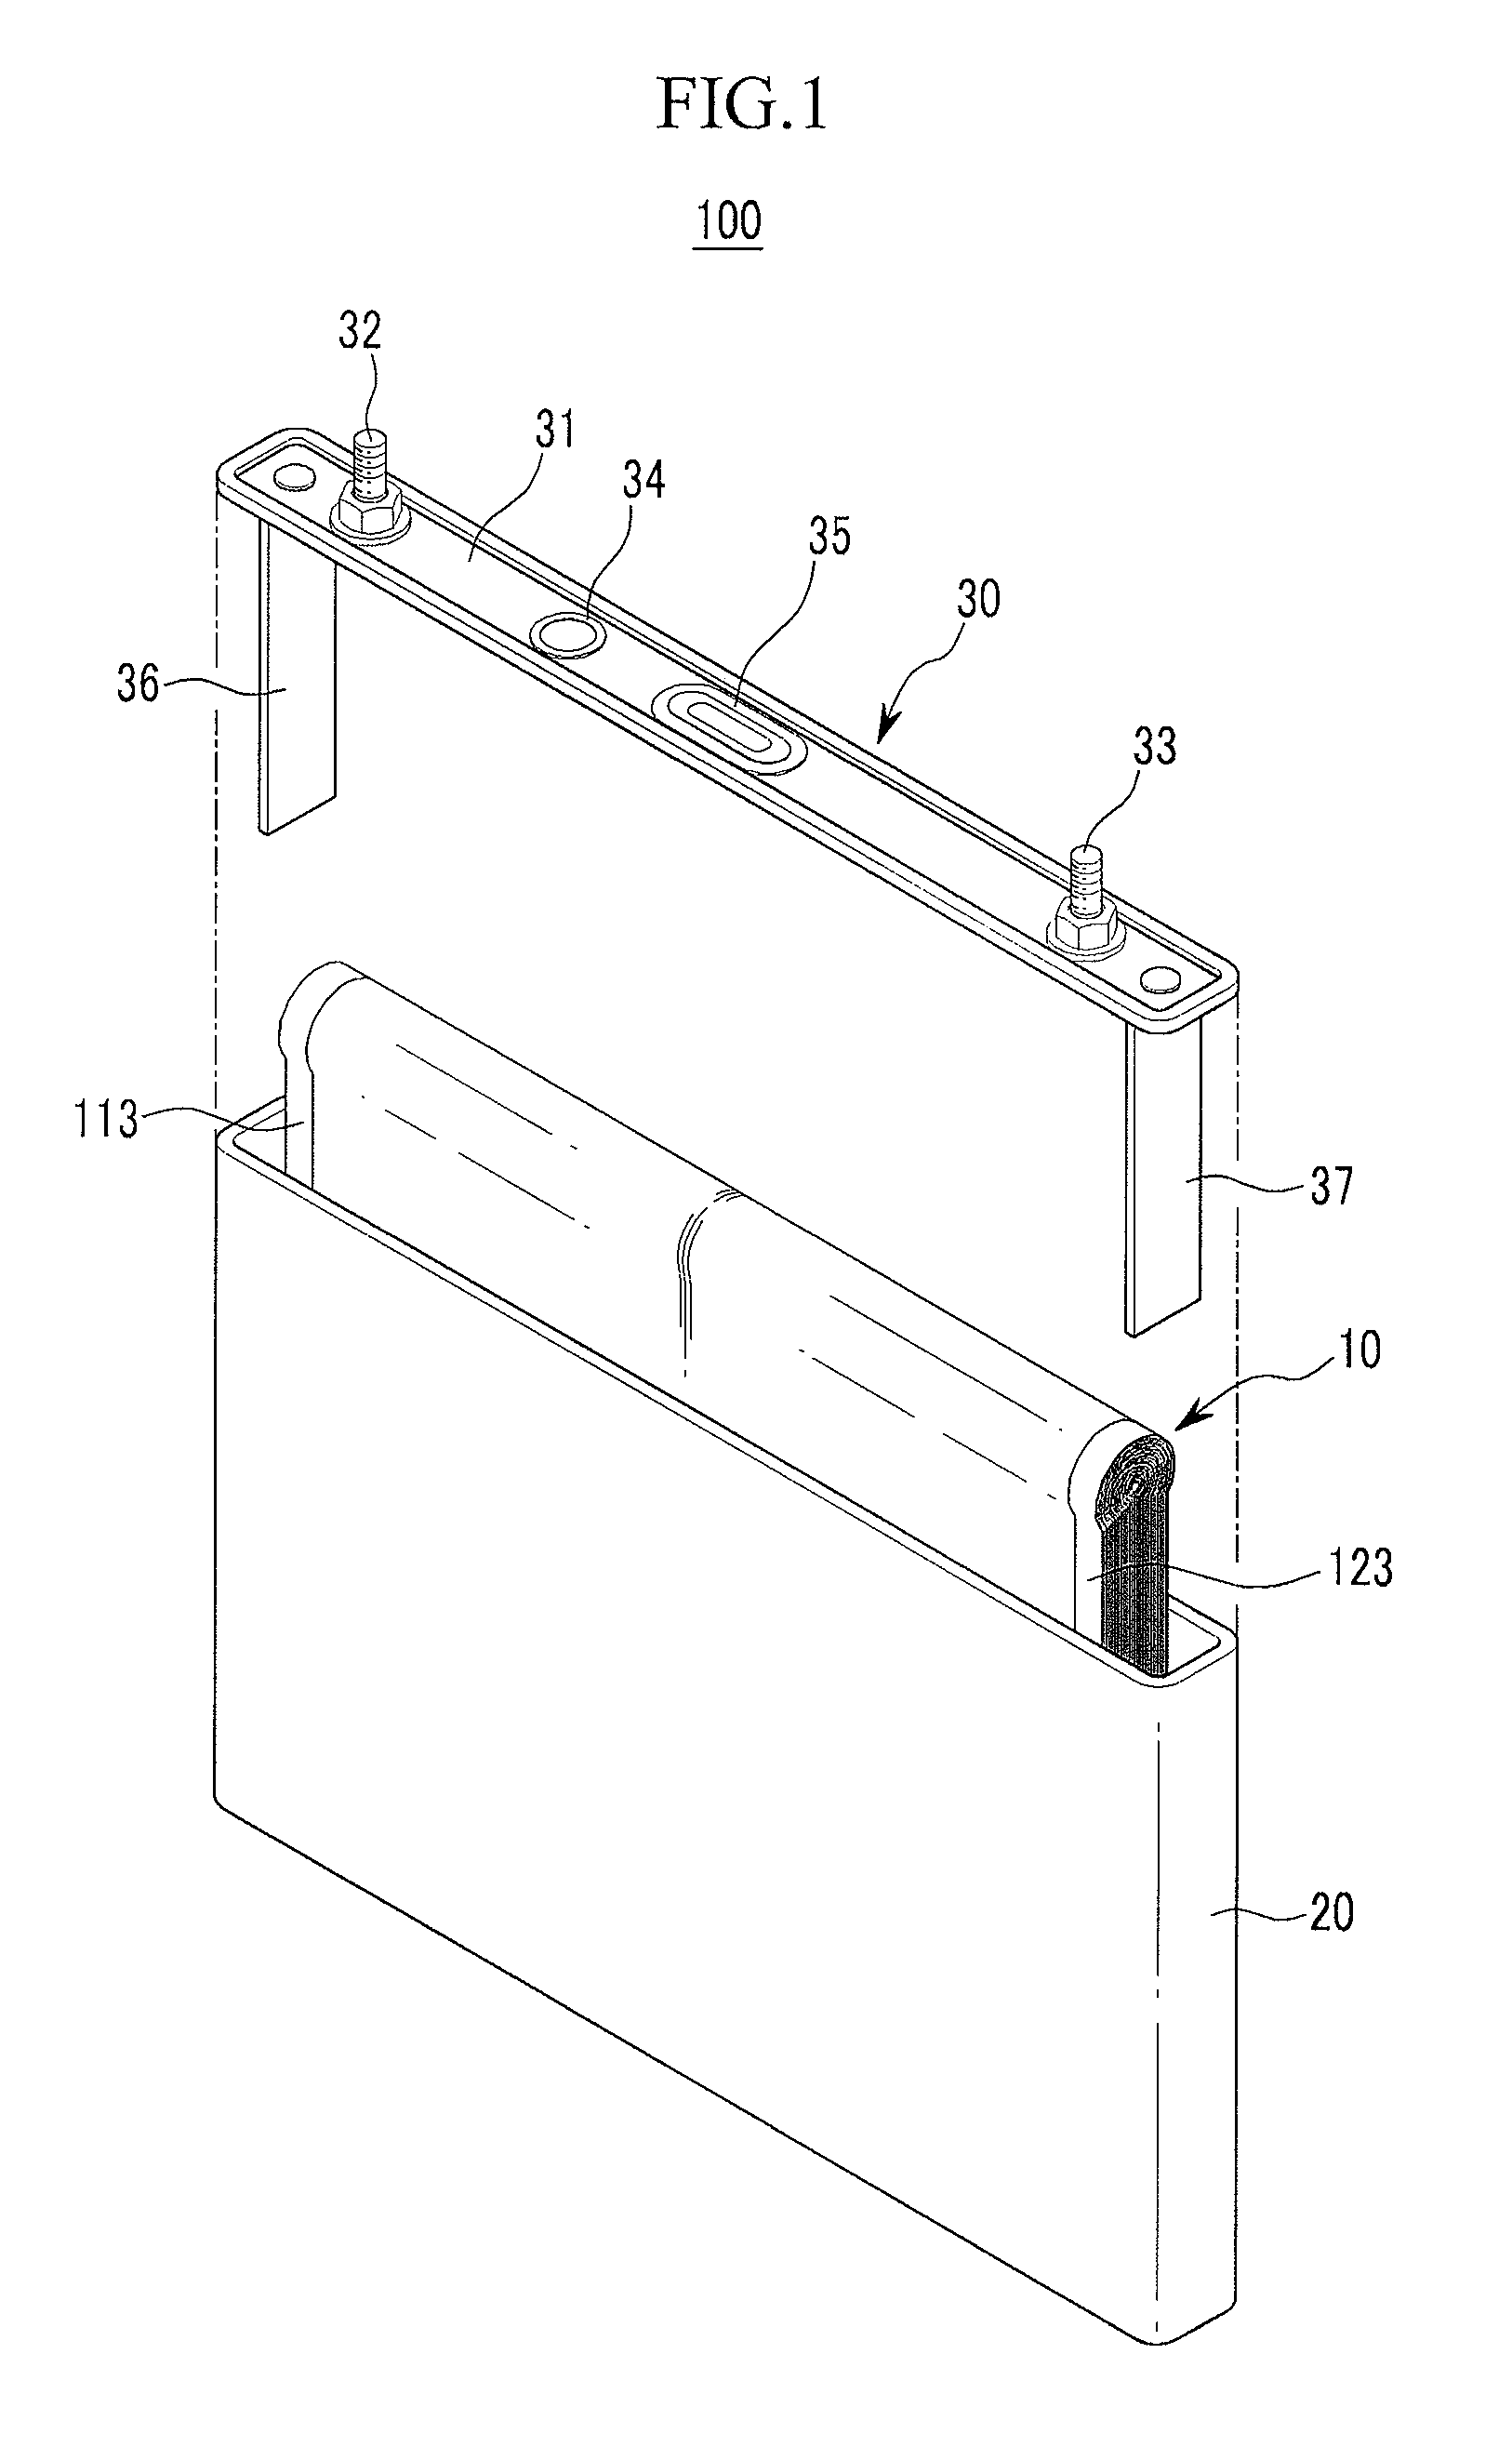 Rechargeable battery with larger curved ends having different radius of curvature